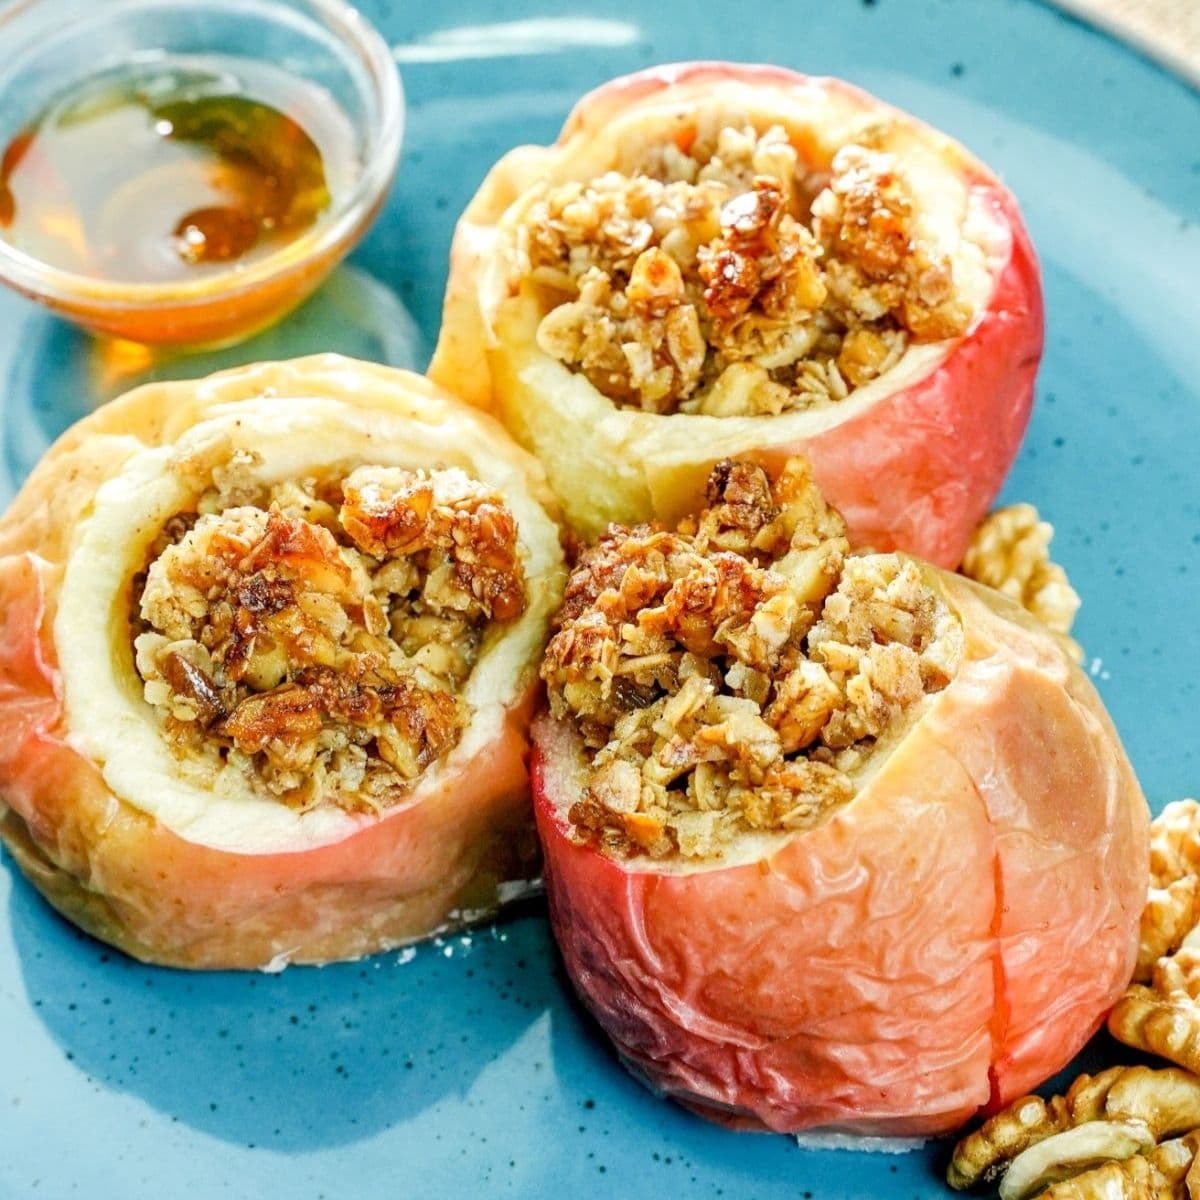 three oatmeal baked stuffed appls on teal plate with spoon